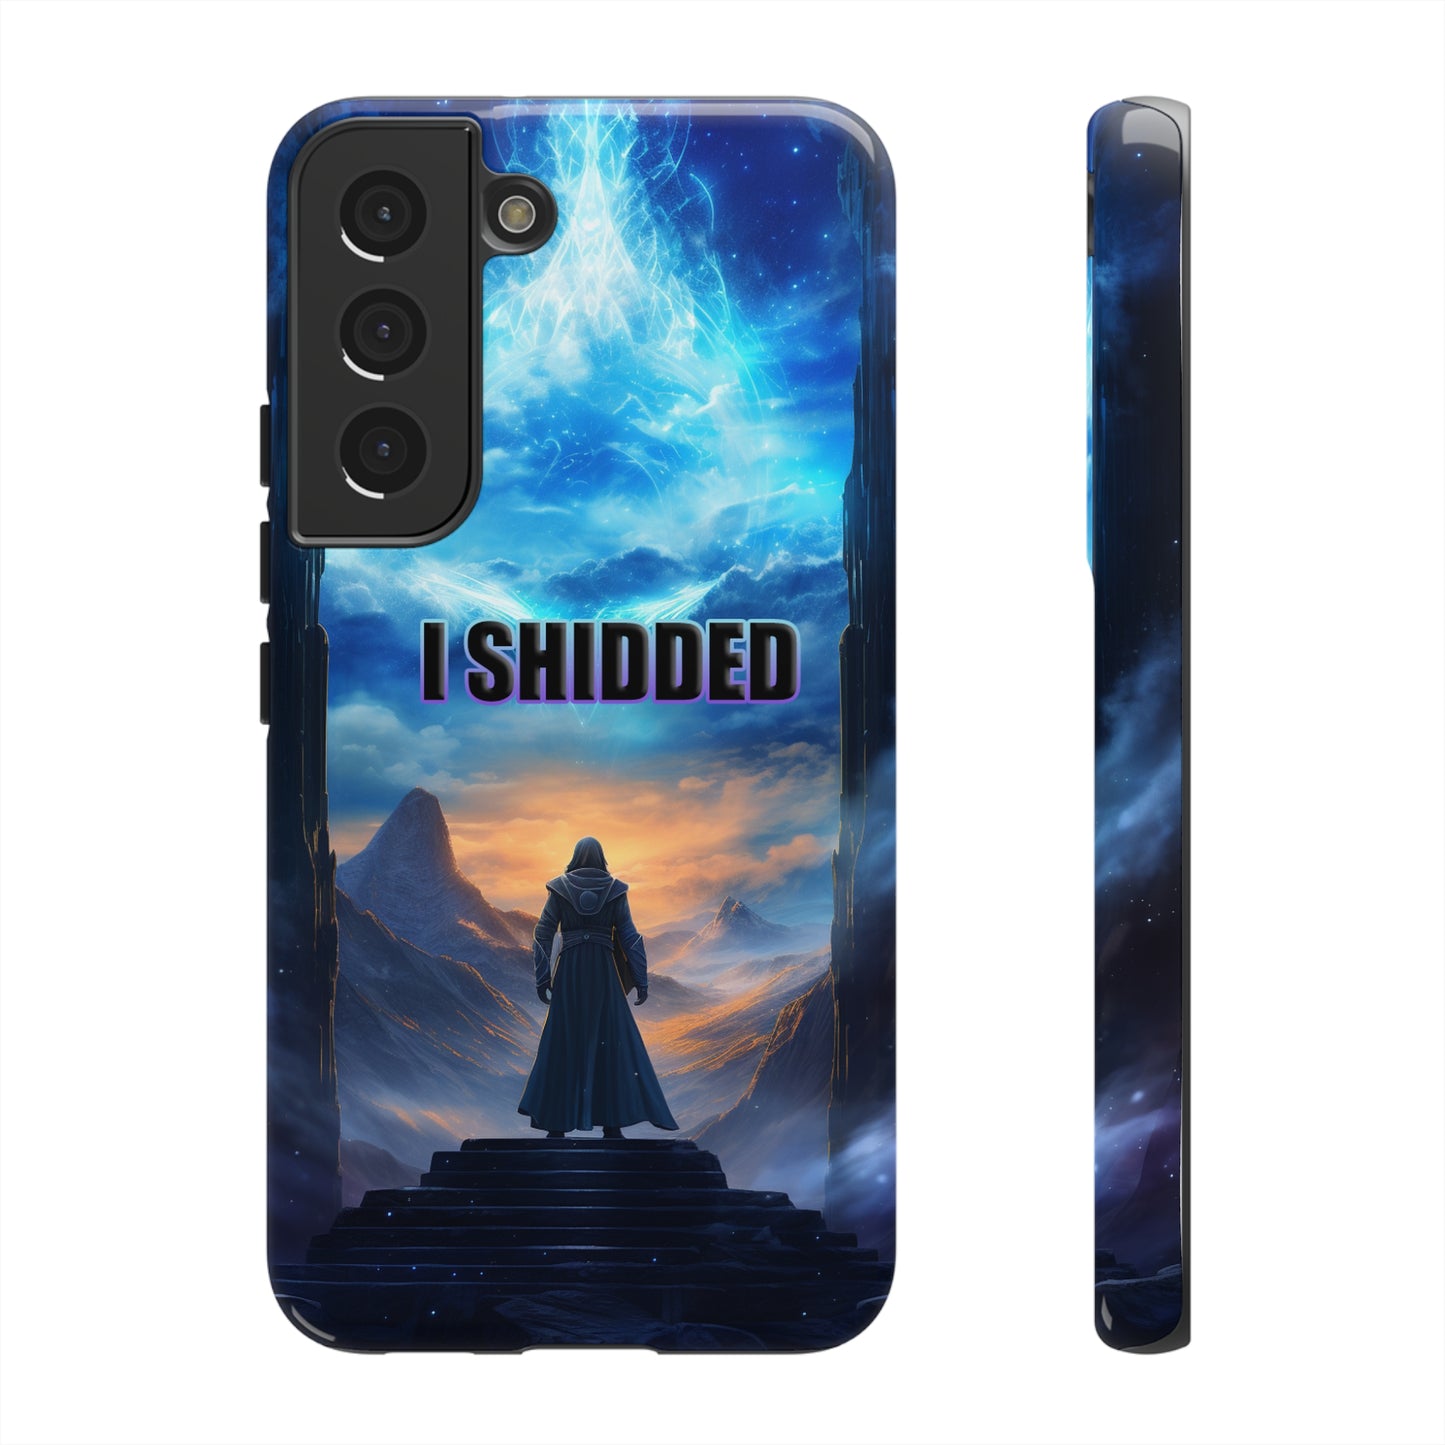 I Shidded Android Cases